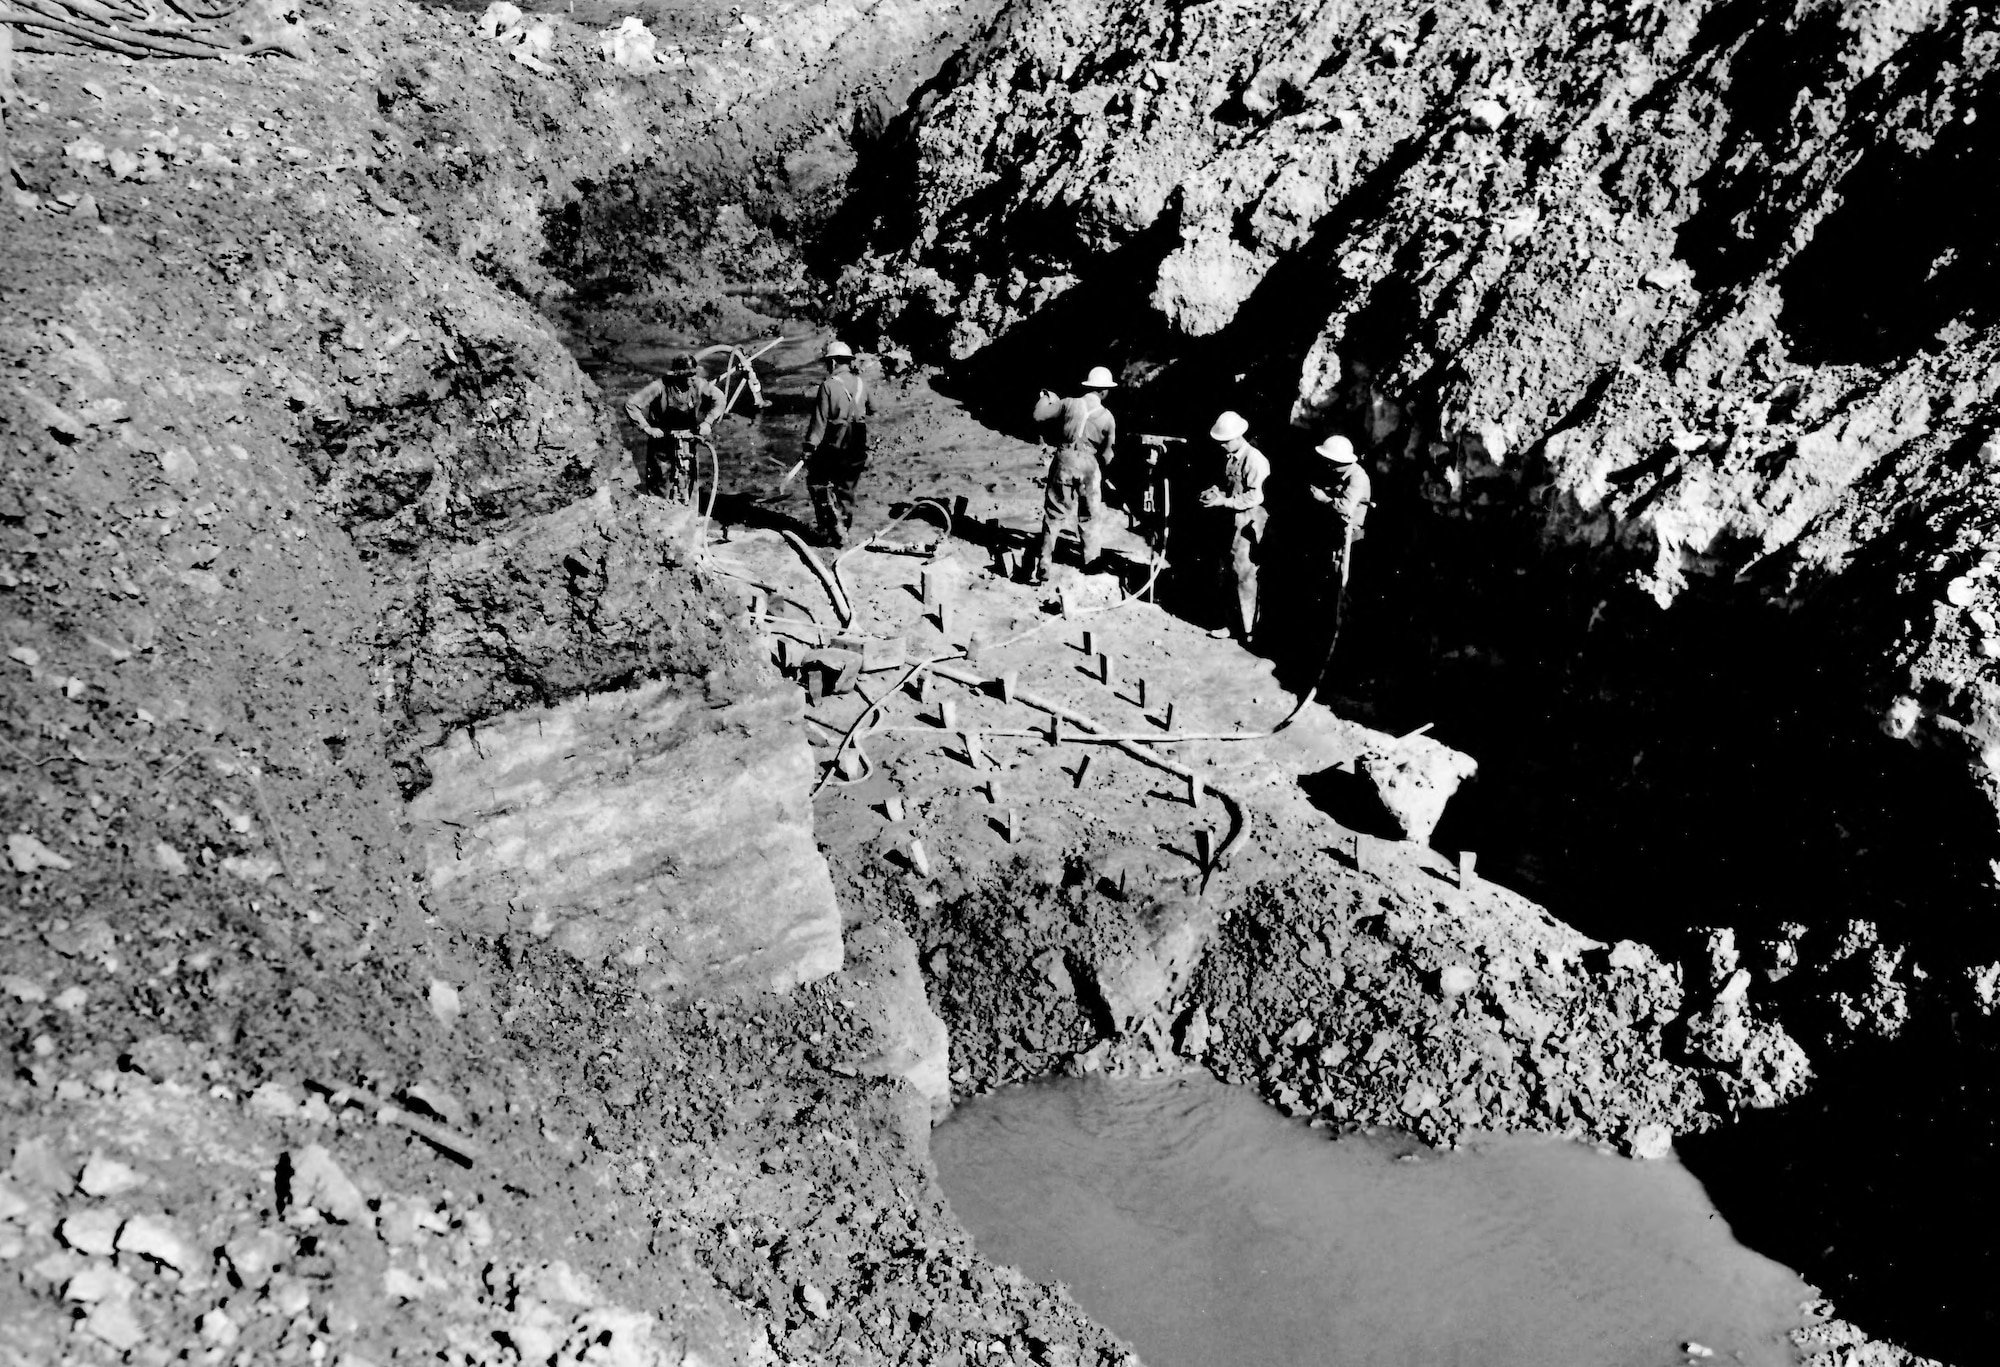 Crews drill rock on the north side of the Elk River Dam core trench in February 1951 during construction of the dam. Construction of the Elk River Dam, built to create Woods Reservoir, was completed 70 years ago this month. Since that time, Woods Reservoir has supplied cooling water to the test facilities at Arnold Air Force Base, Tennessee. Arnold AFB is the headquarters of the Arnold Engineering Development Complex. (U.S. Air Force photo)